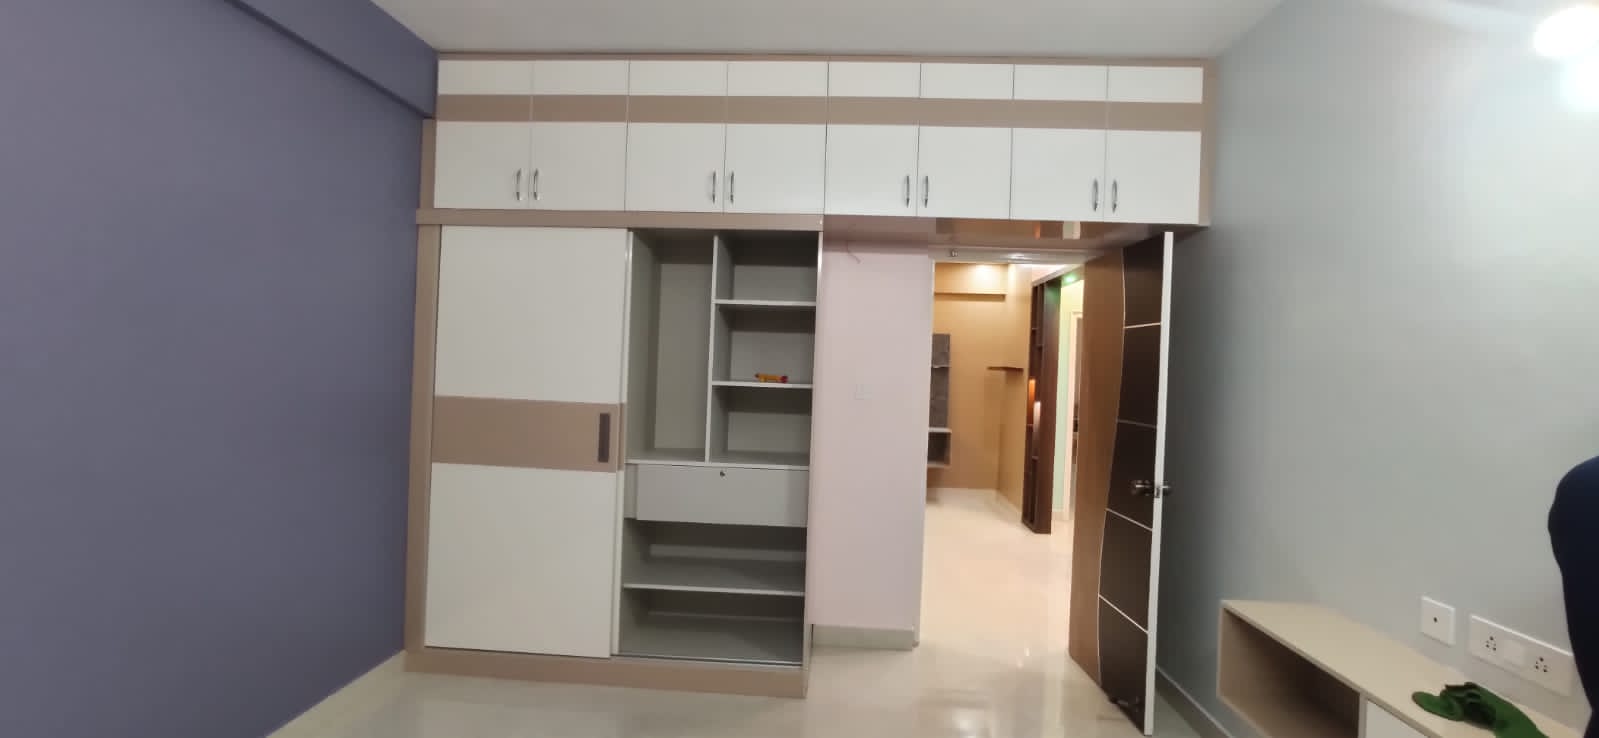 2 BHK Independent House for Lease Only at JAML2 - 4554 in JP Nagar Layouts